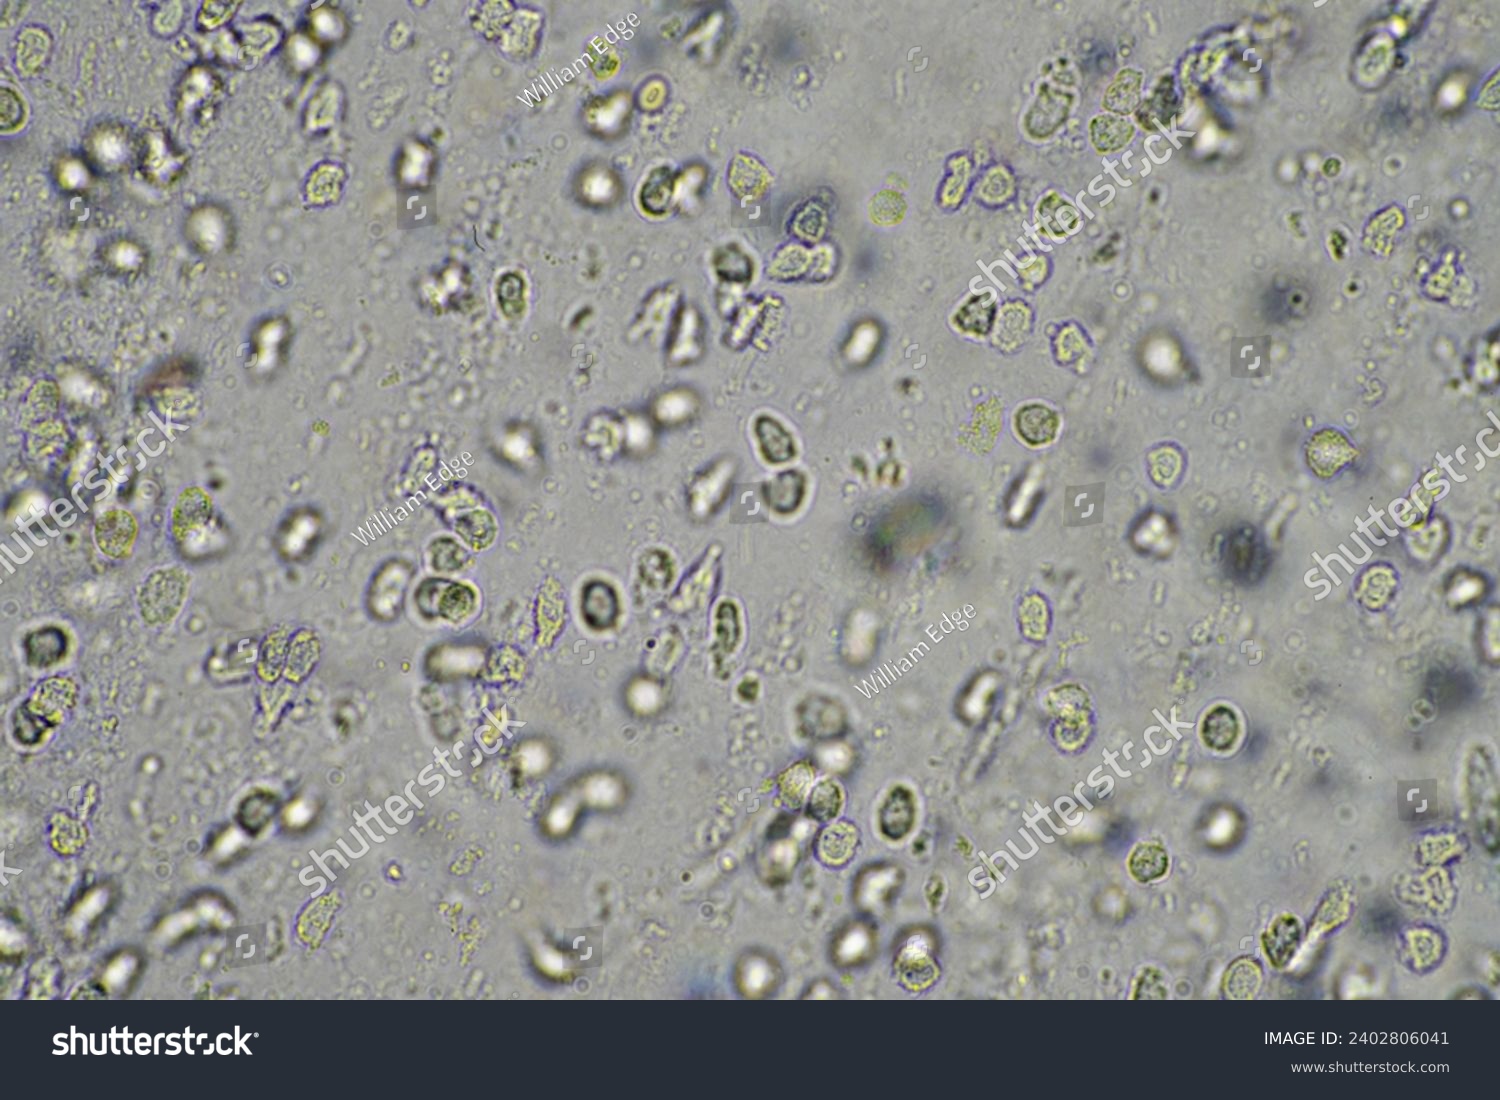 Coughing up mucus and phlegm from a chest infection from a virus and bacteria infection, looking at it under the microscope, with cells and microorganisms. Bacteria and skin cells #2402806041